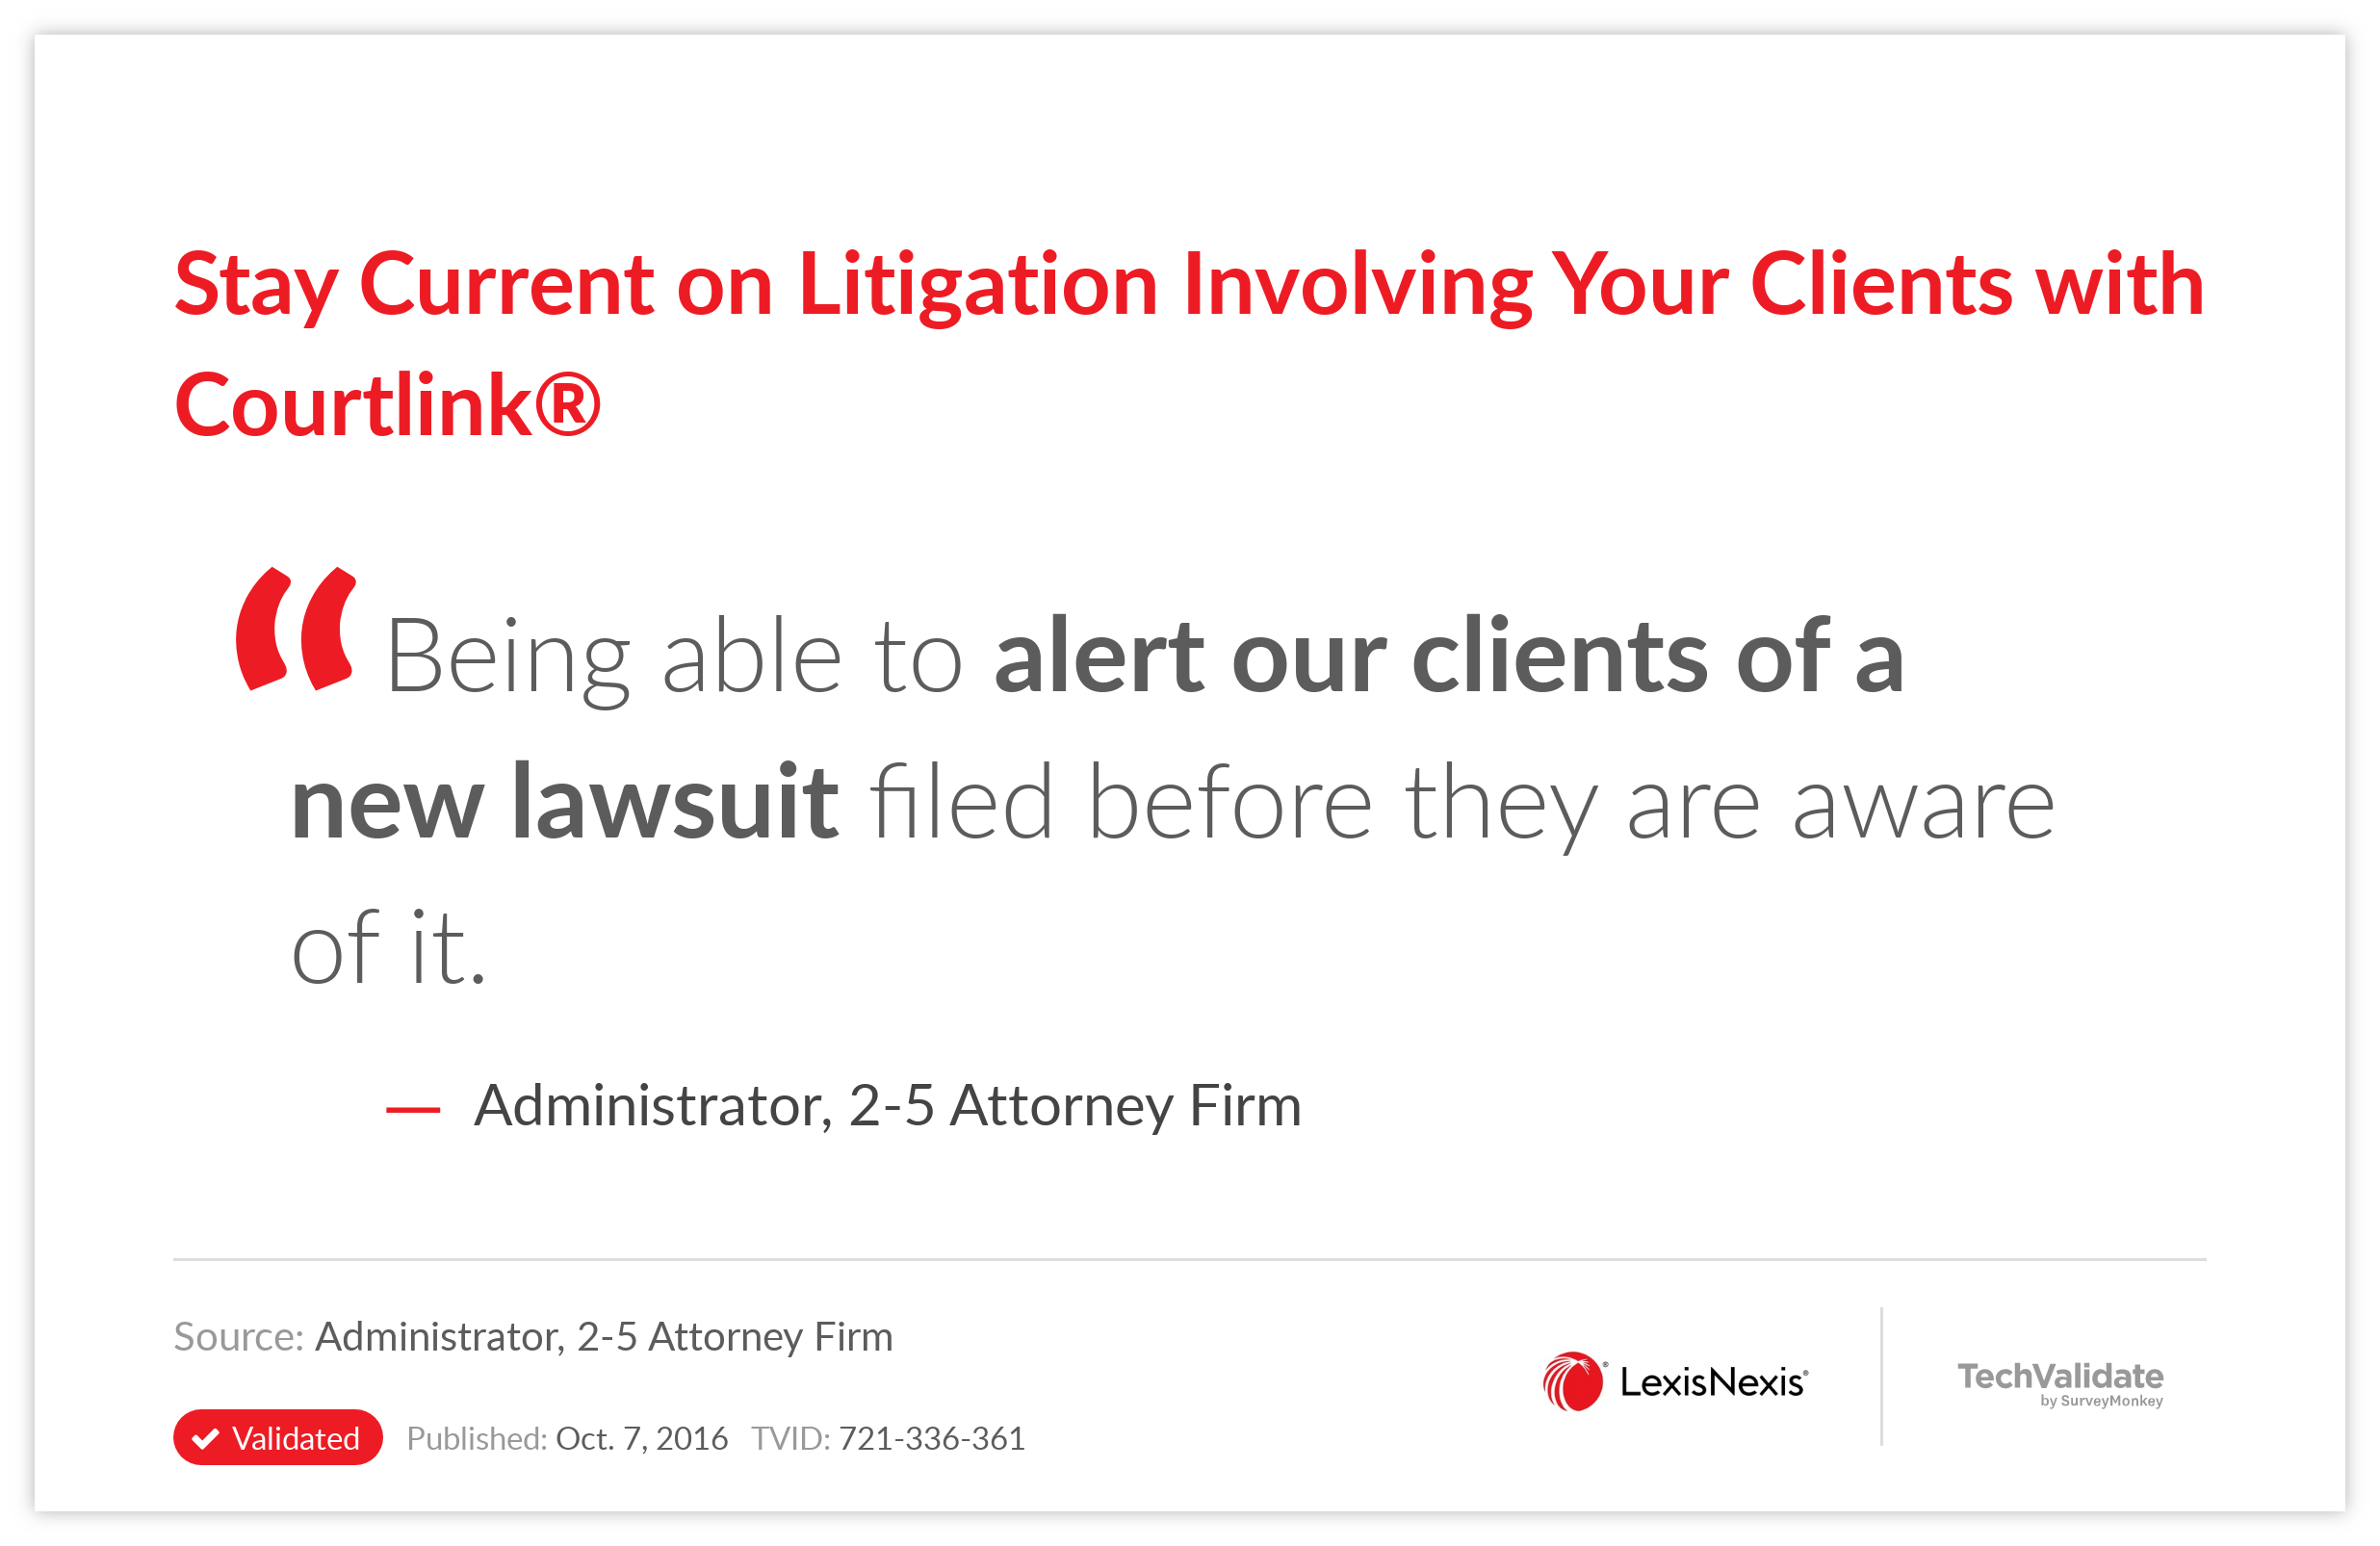 Stay Current on Litigation Involving Your Clients with Courtlink(R)